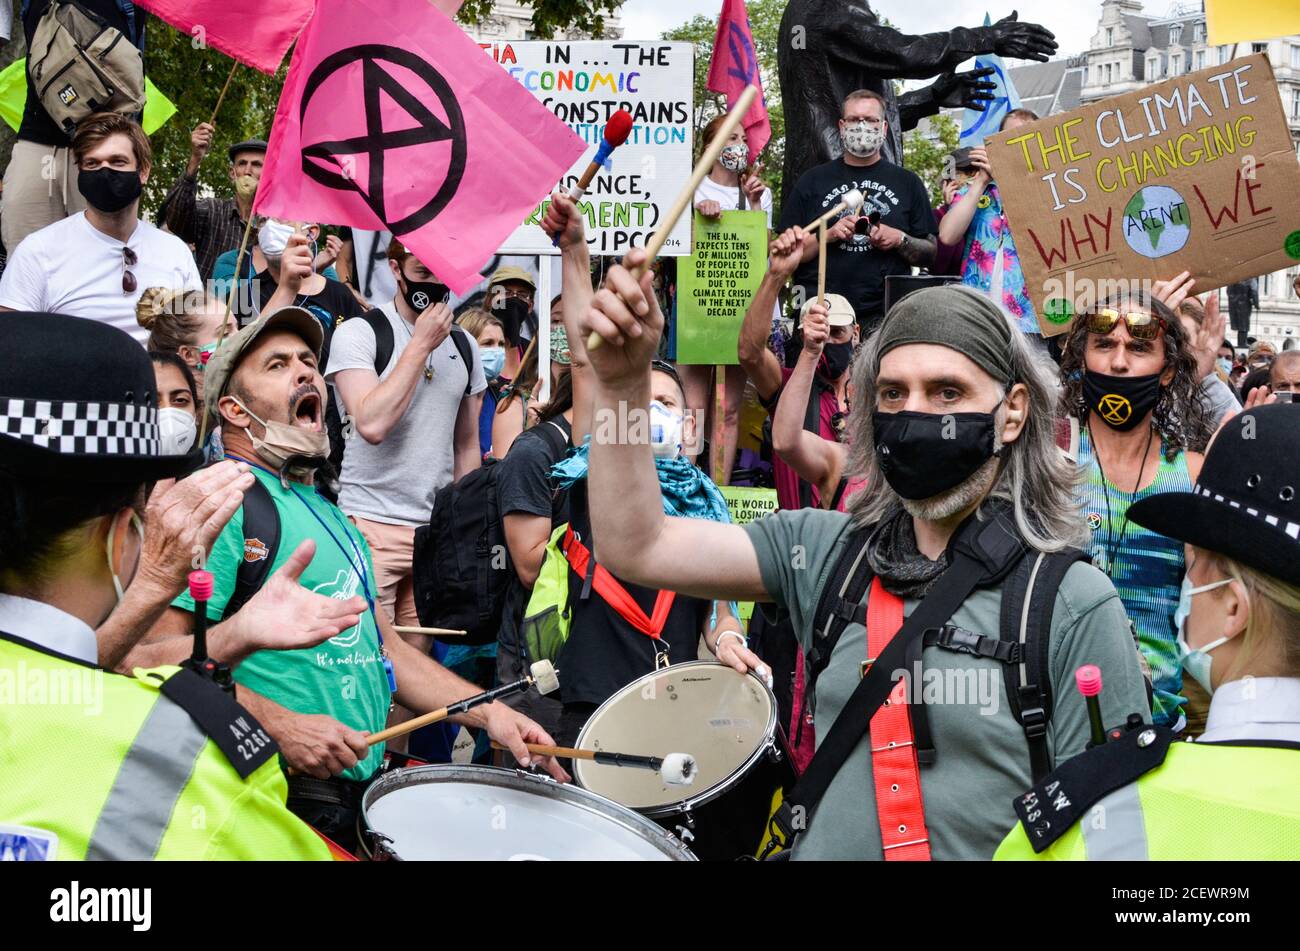 Extinction Rebellion protesters converge upon Parliament Square in central London on Day 2 of their environmental action, blocking roads in and out of the area demanding the government listen to their demand for a citizen's assembly to tackle climate change. Stock Photo